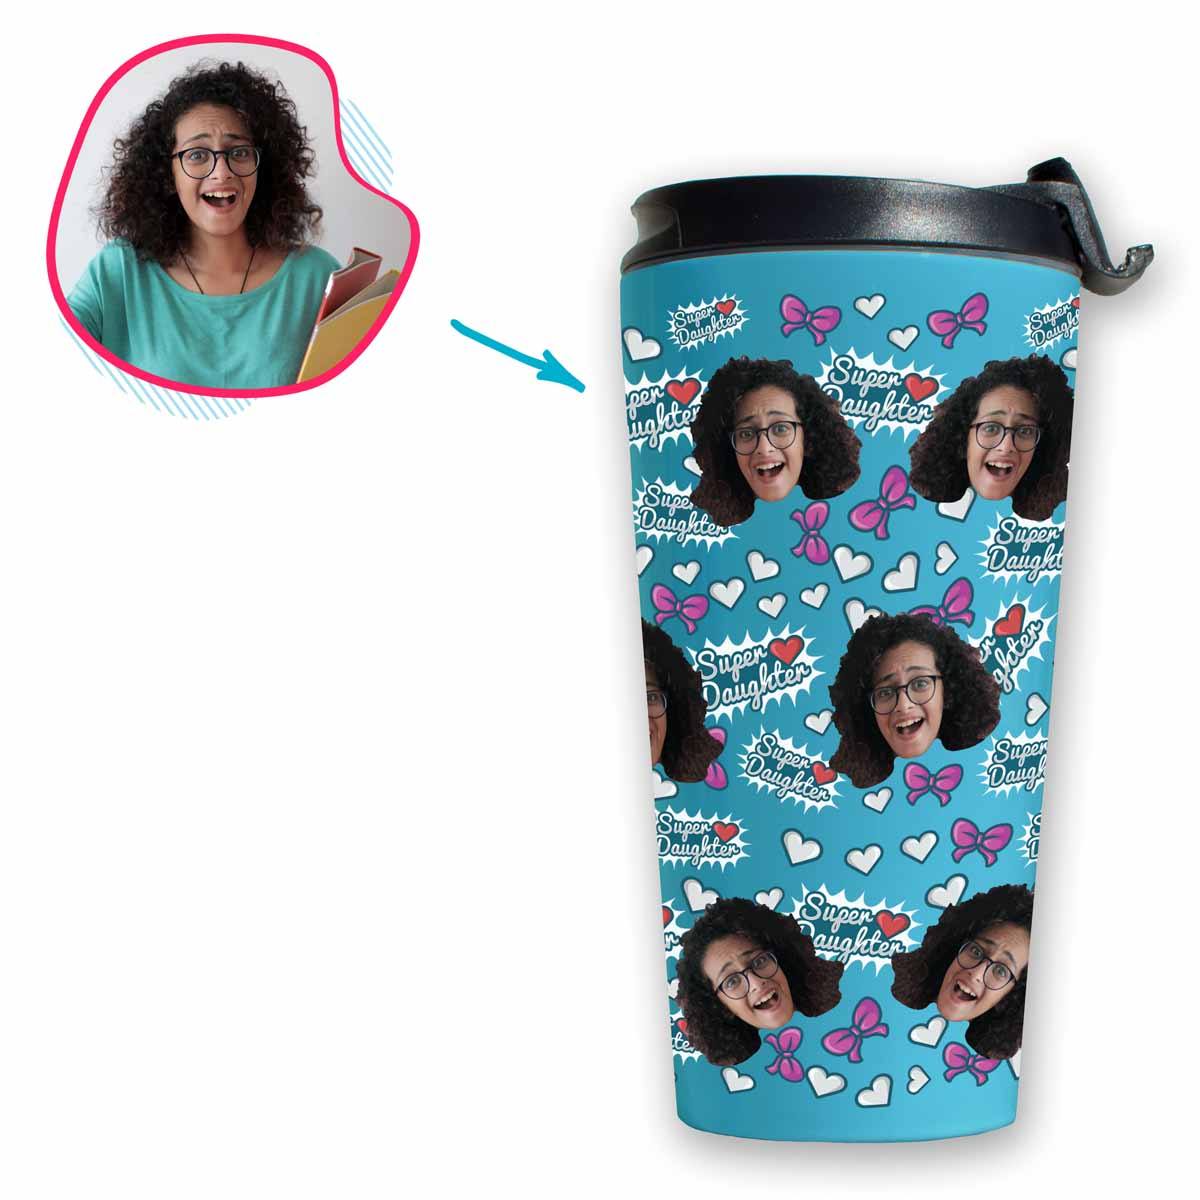 blue Super Daughter travel mug personalized with photo of face printed on it